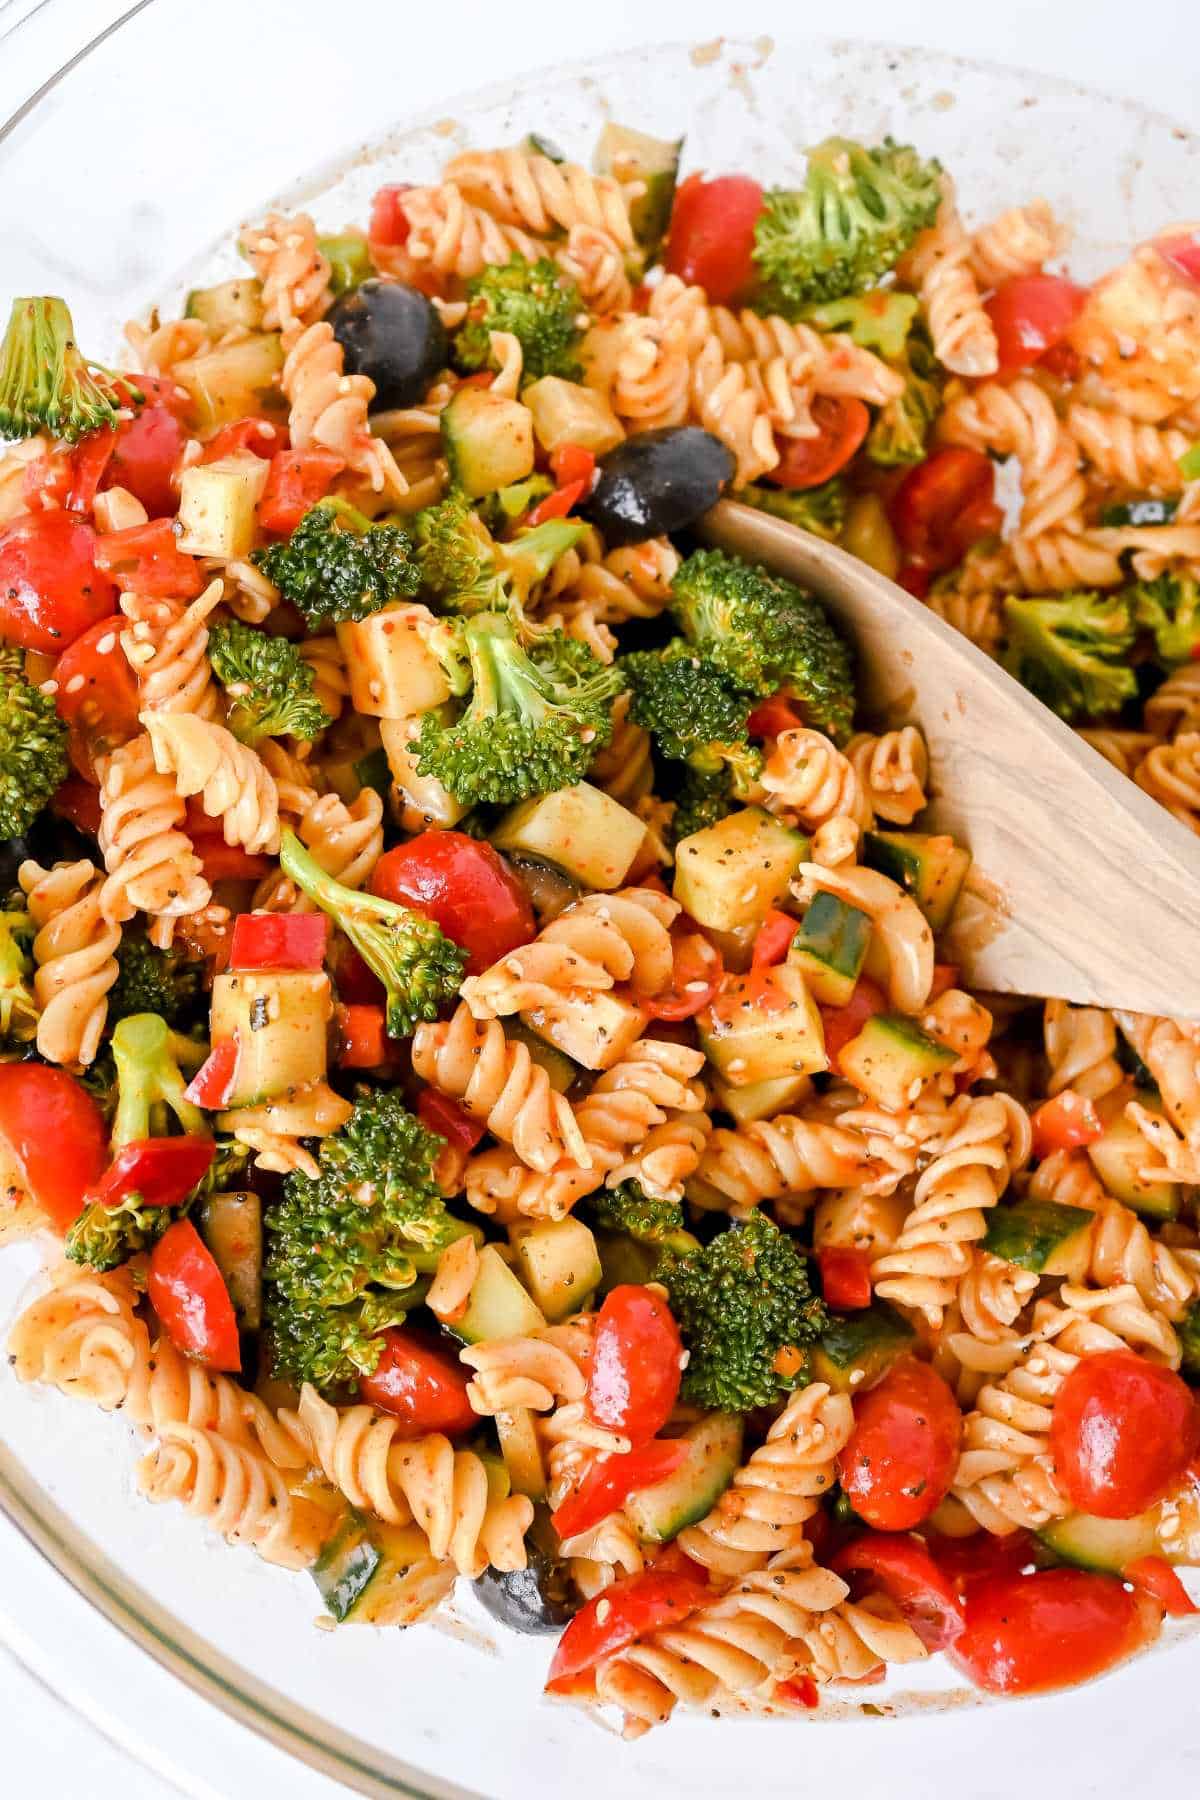 gluten-free pasta salad with vegetables and a wooden spoon in a glass bowl on a white background.